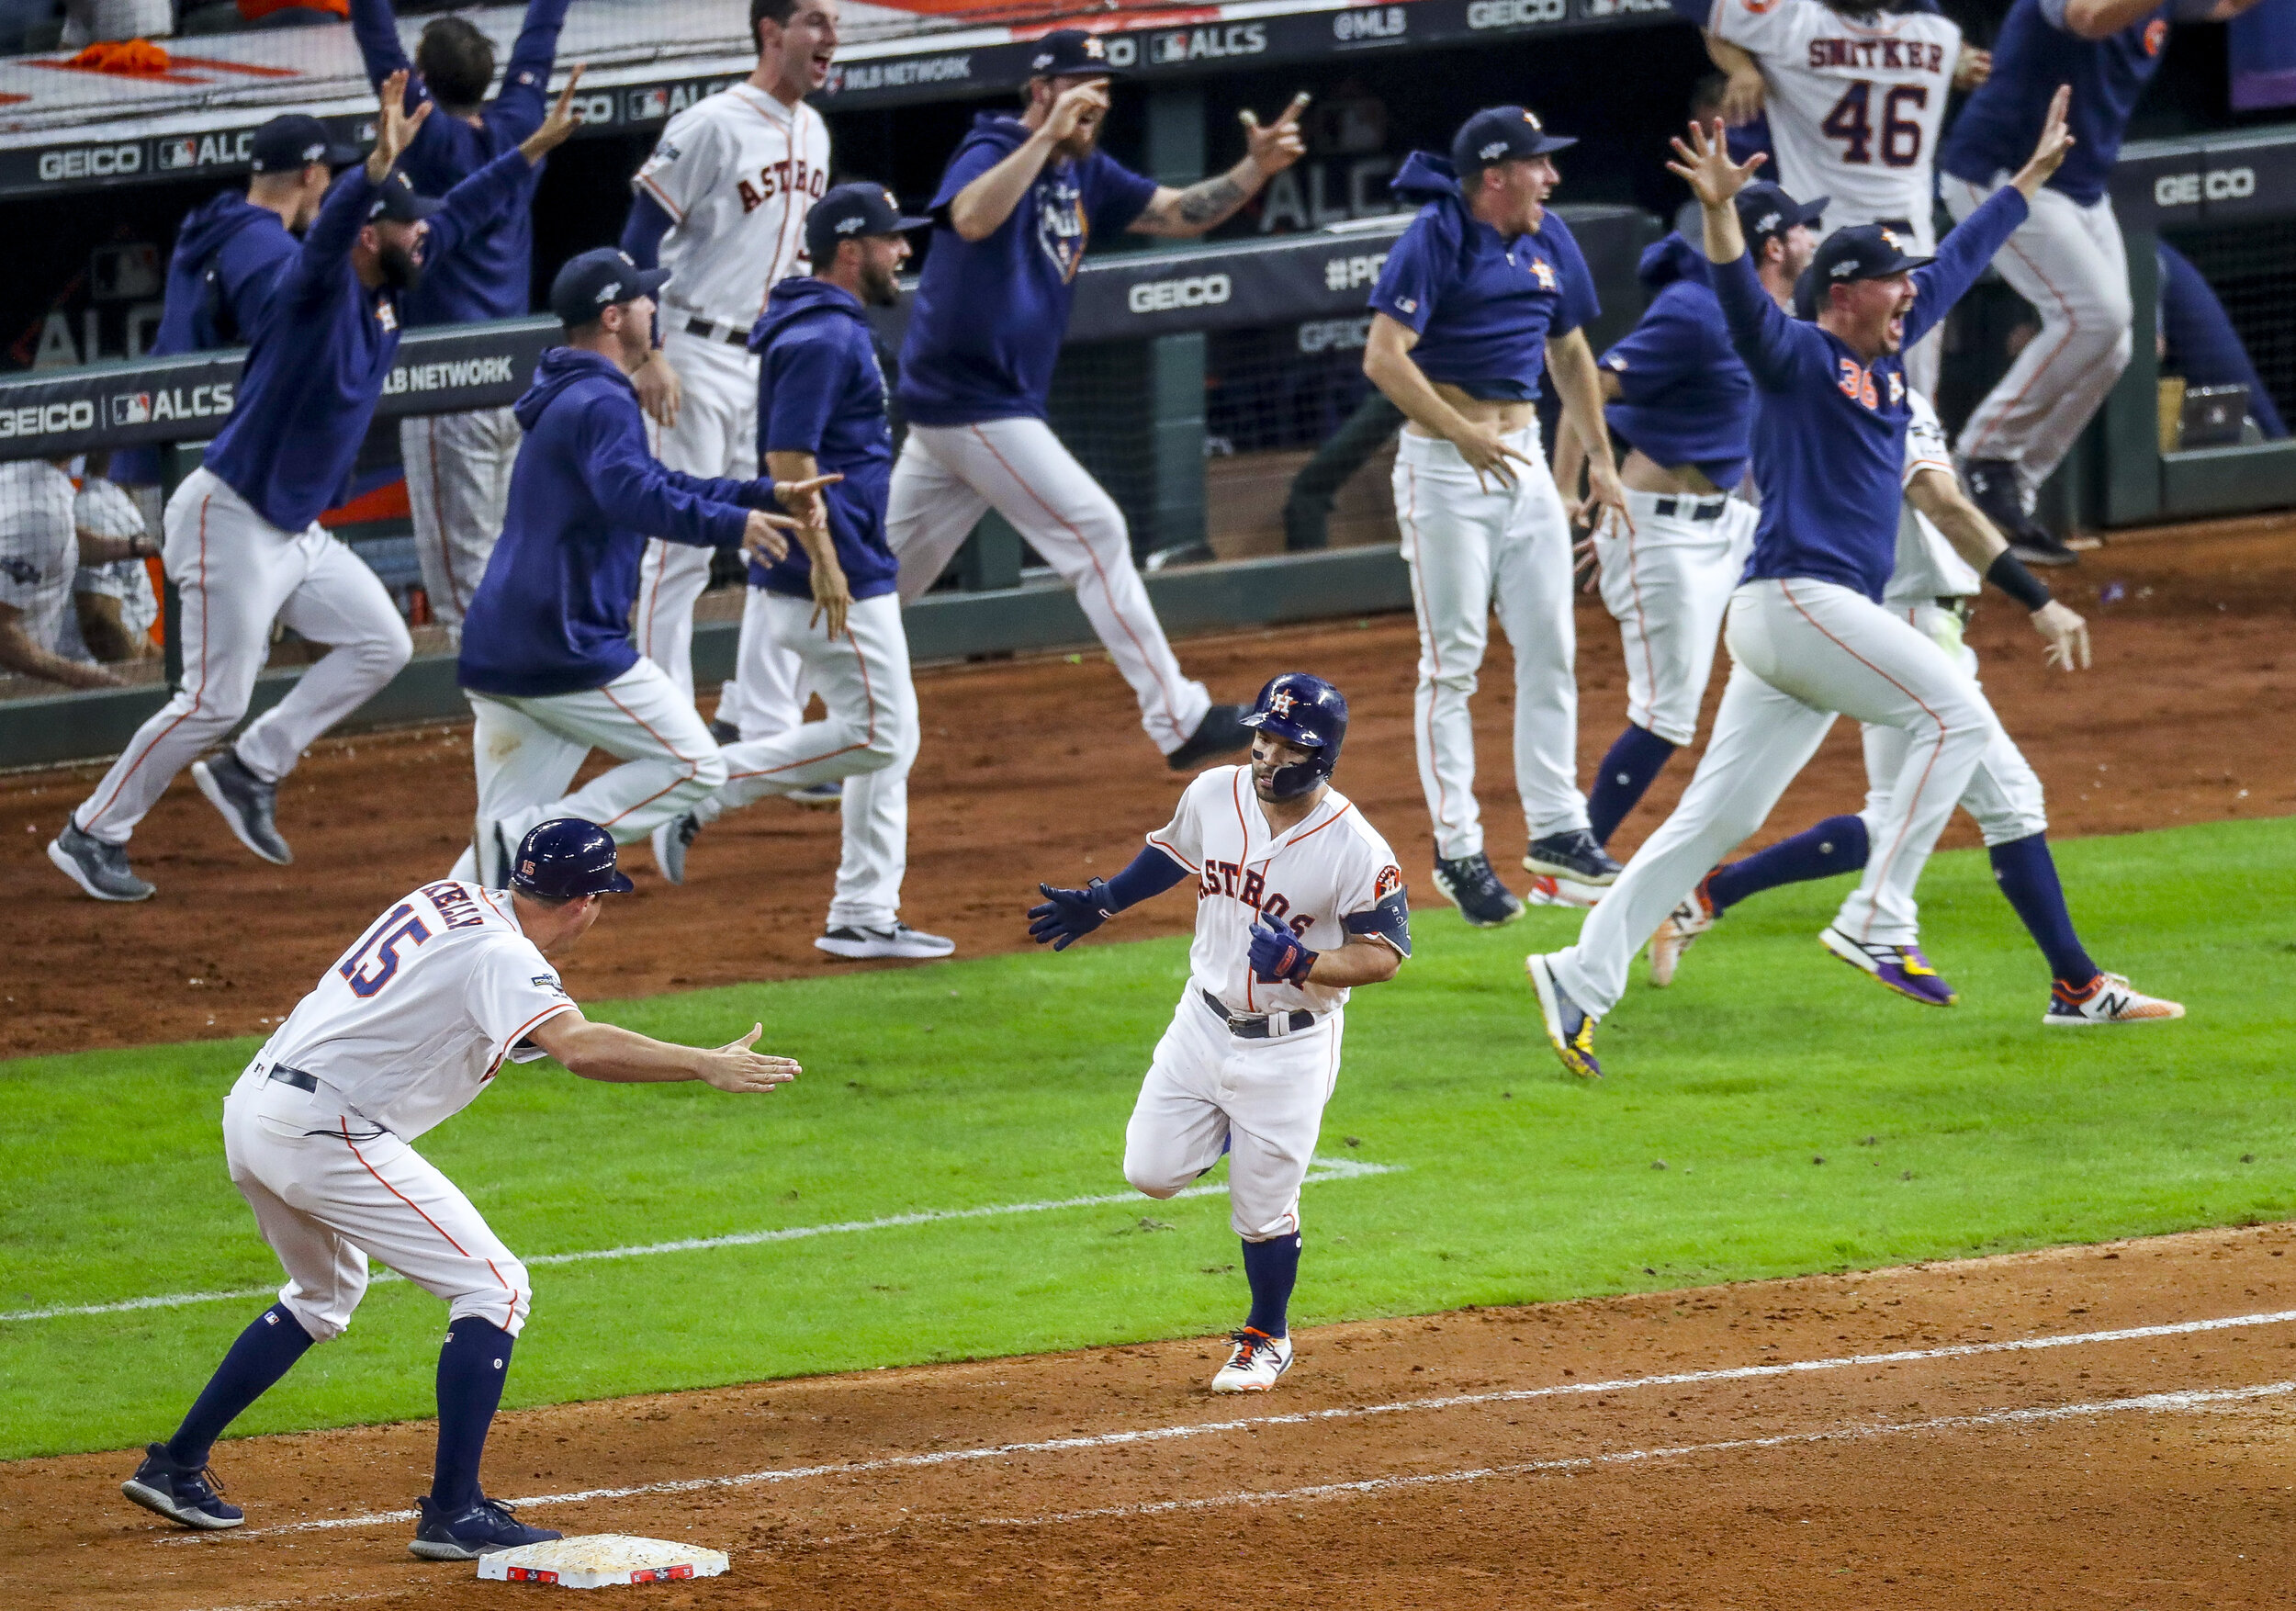  Houston Astros second baseman Jose Altuve (27) rounds first base after hitting a game-winning, two-run, walk-off home run to win Game 6 of the American League Championship Series during the ninth inning at Minute Maid Park in Houston on Saturday, Oc